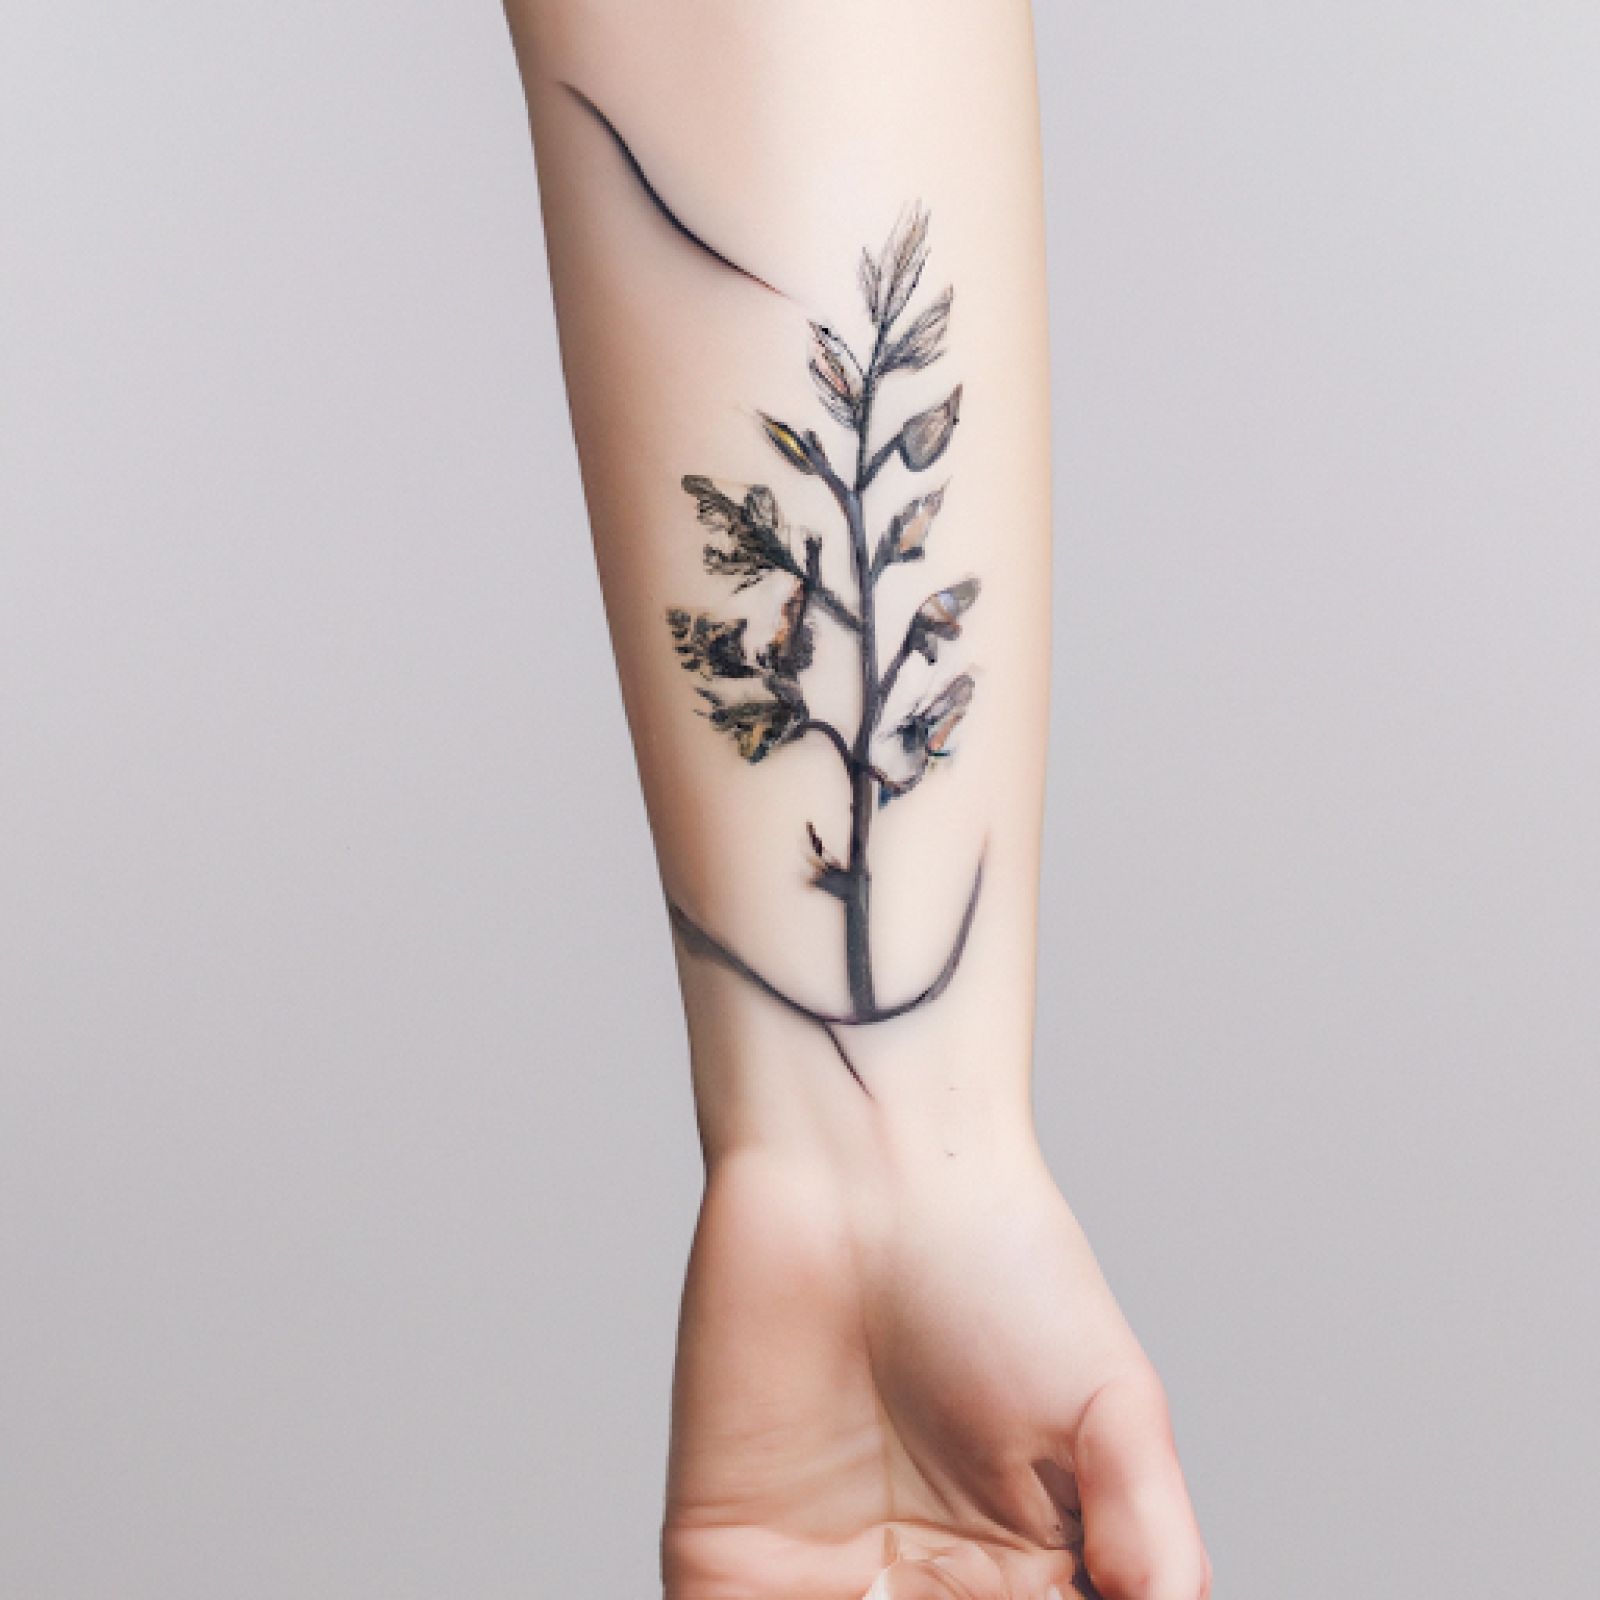 Tree of life tattoo on arm for women